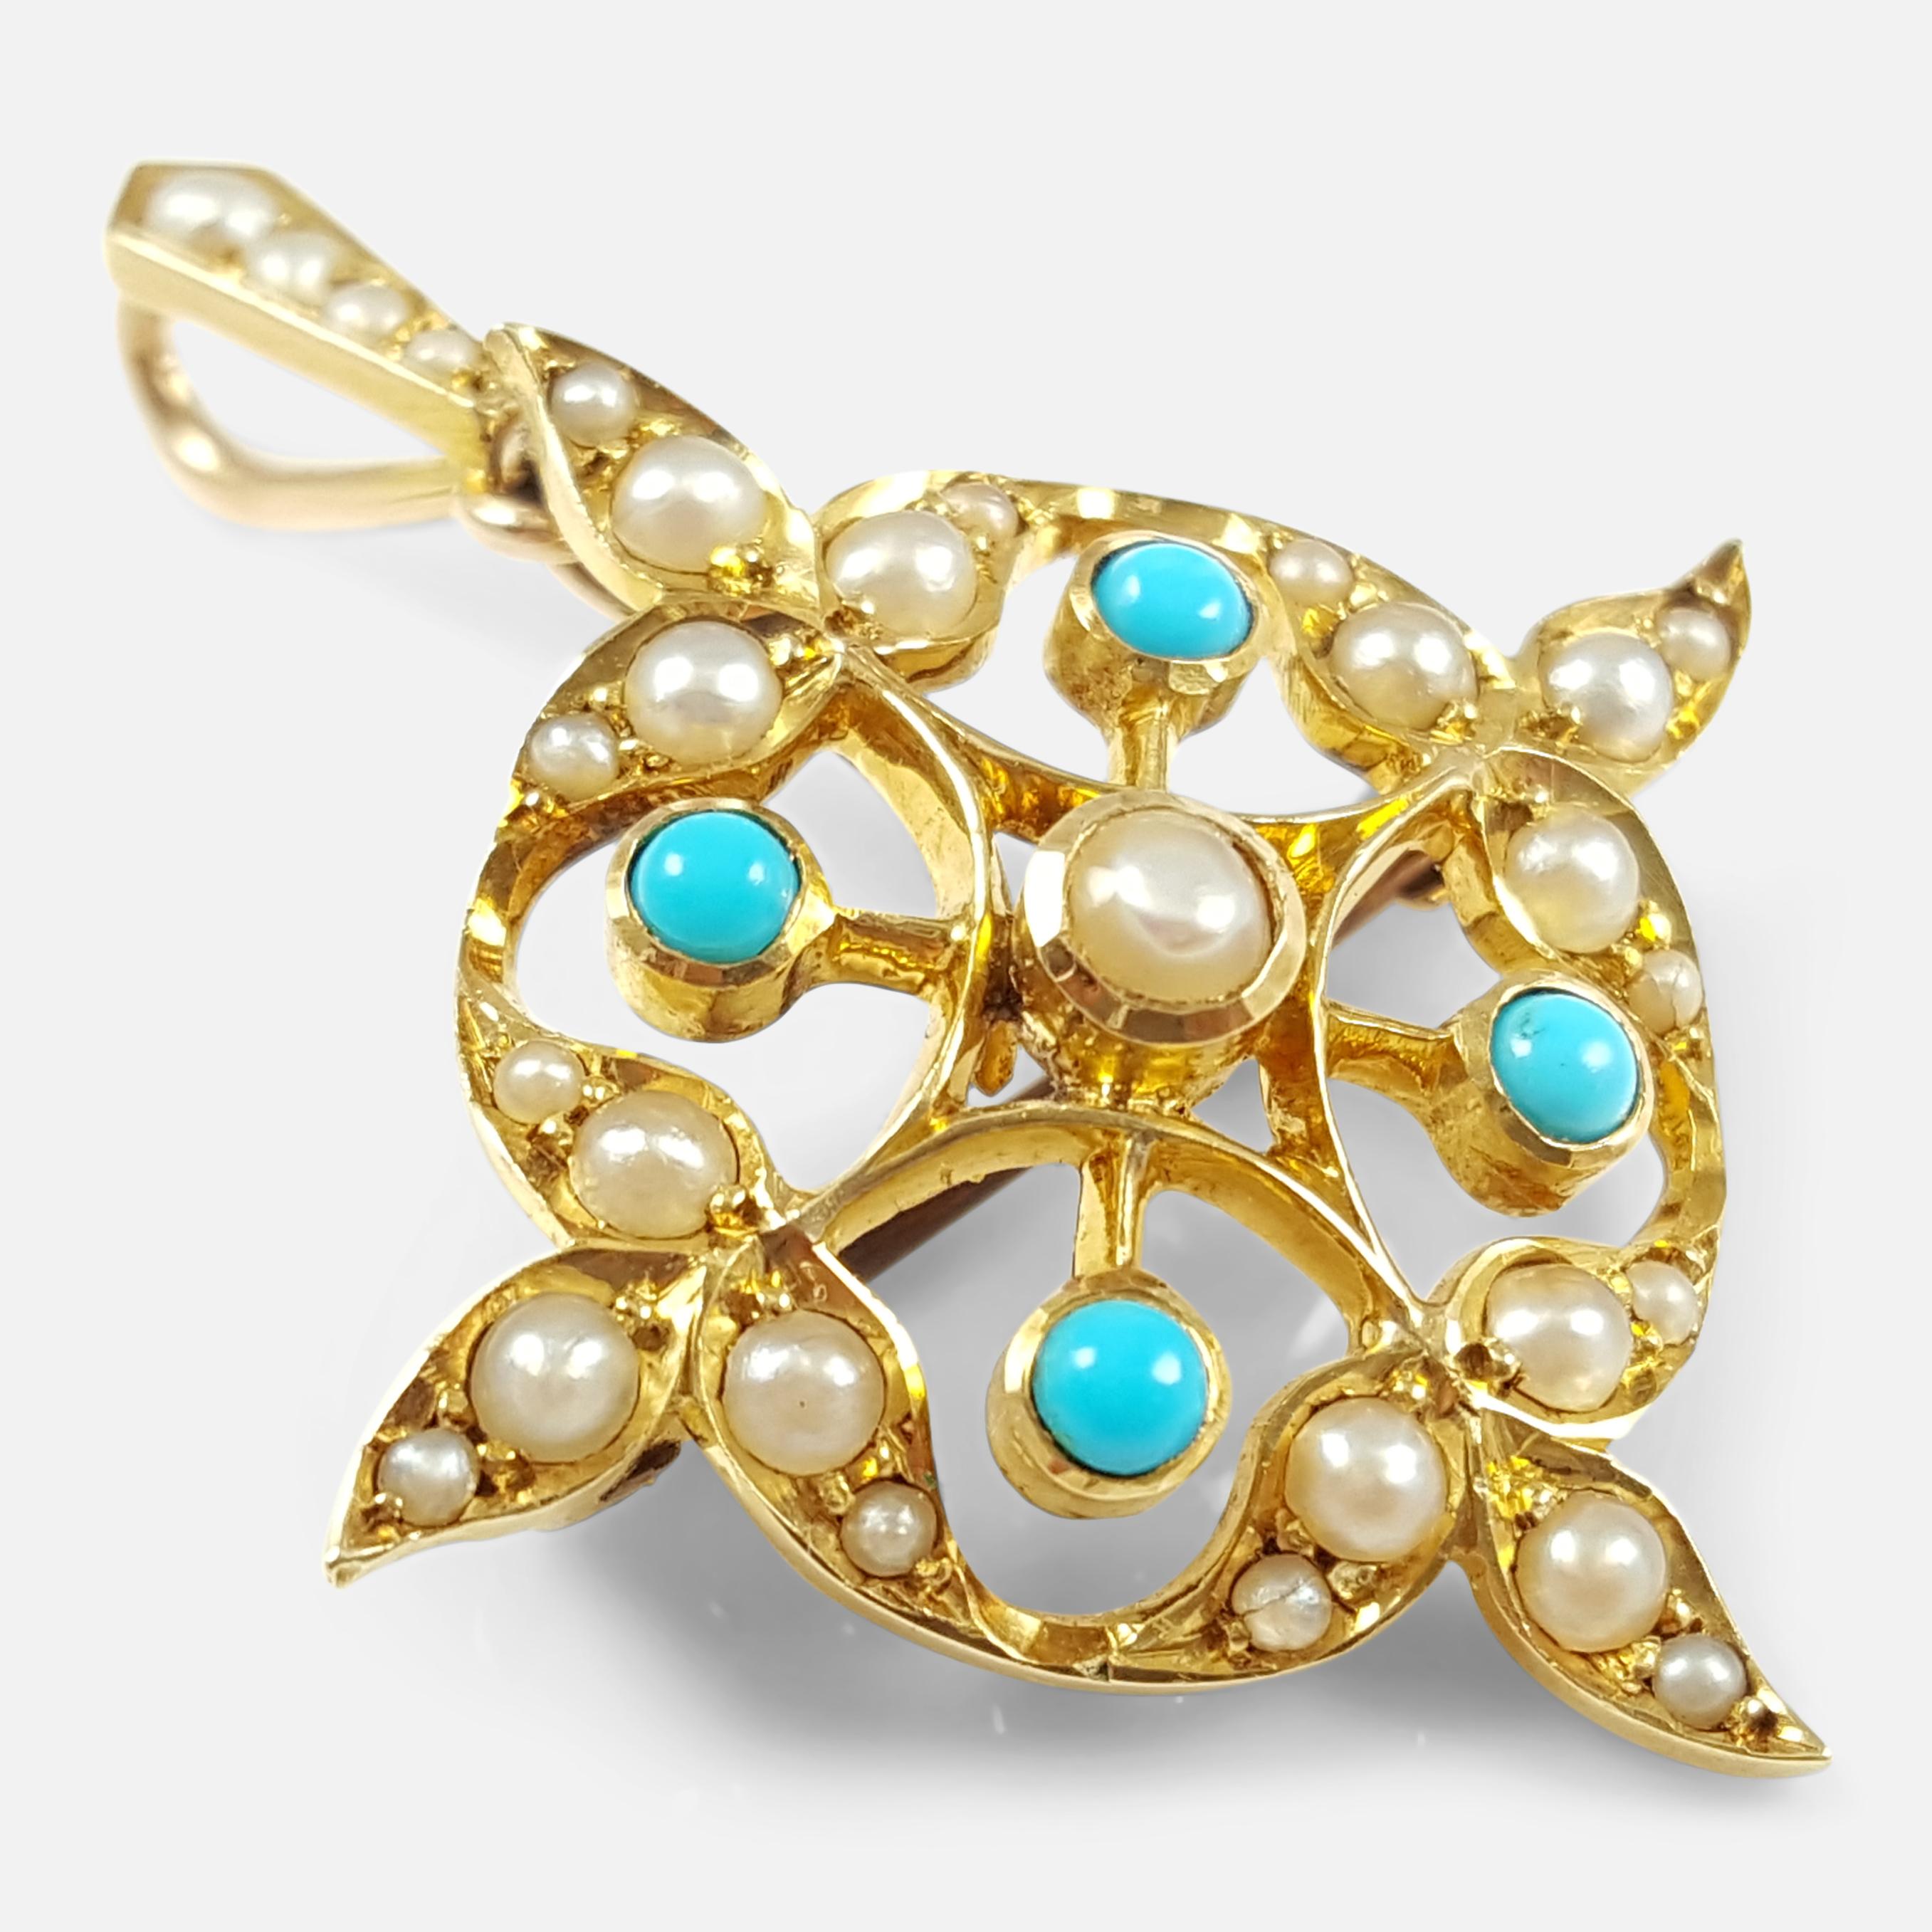 An Edwardian 15 karat yellow gold turquoise cabochon & seed pearl pendant & brooch. The pendant is stamped 15ct to denote 15 karat (carat) gold.

Date: - Circa 1905.

Measurement: - The pendant including bale measure 3.7 cm (height) x 2.8 cm